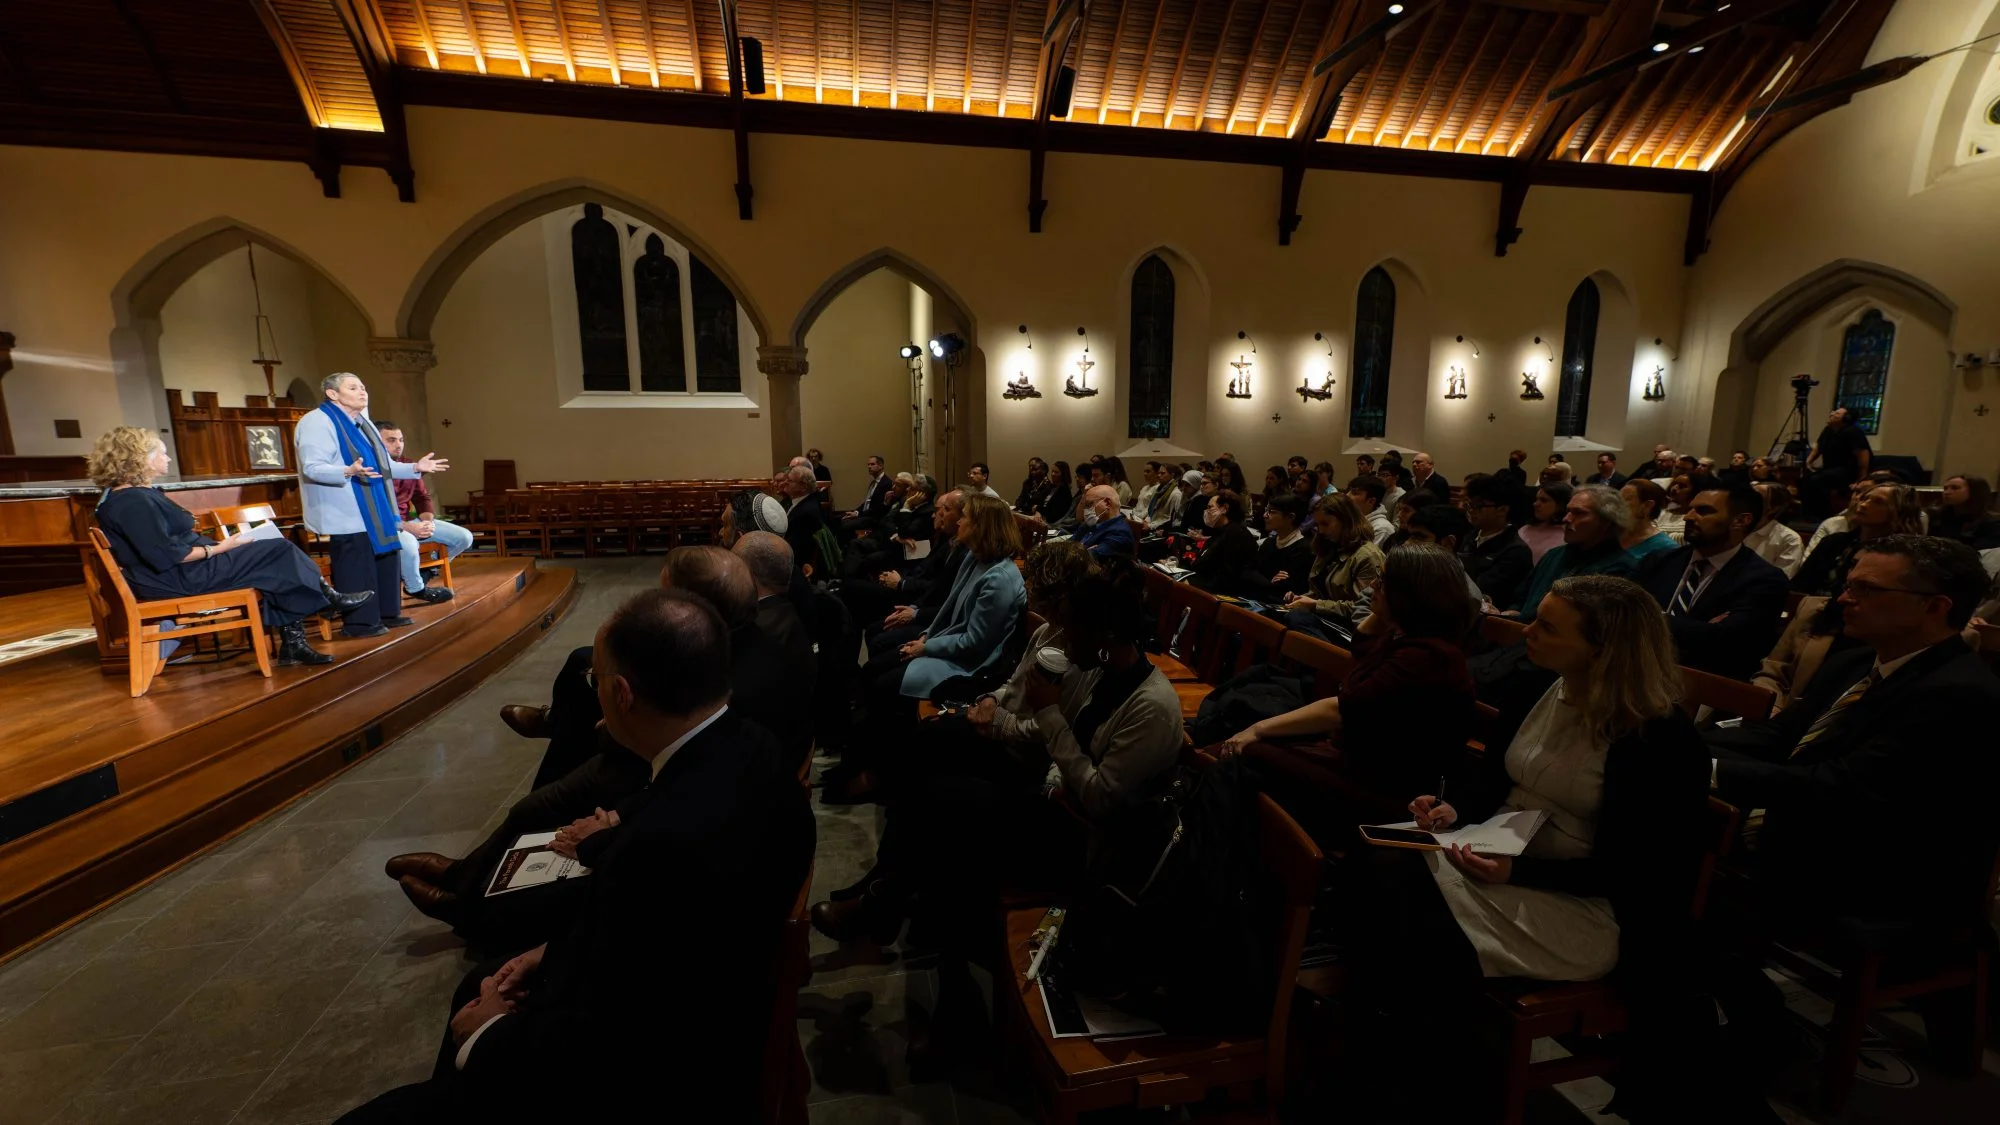 Georgetown hosts dialogue on Reconciliation Between Bereaved Israeli and Palestinian Families | Georgetown